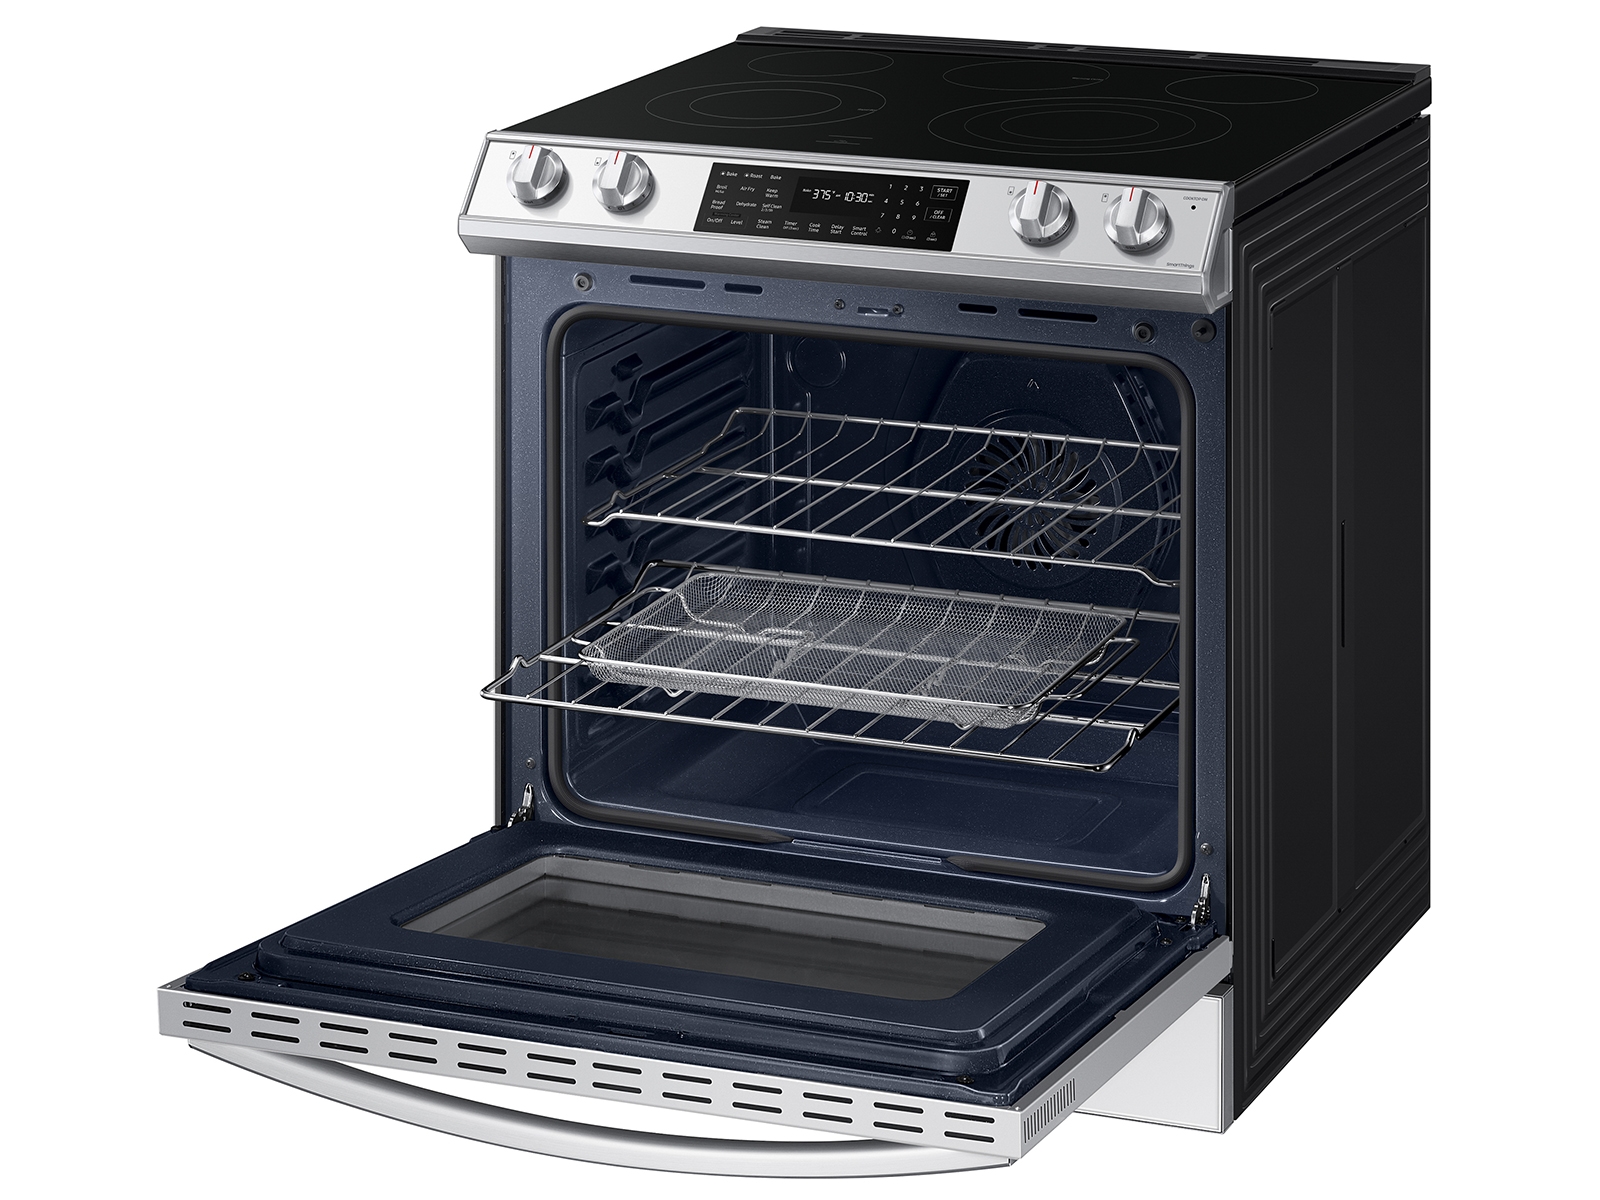 Thumbnail image of Bespoke 6.3 cu. ft. Smart Front Control Slide-In Electric Range with Air Fry & Wi-Fi in White Glass